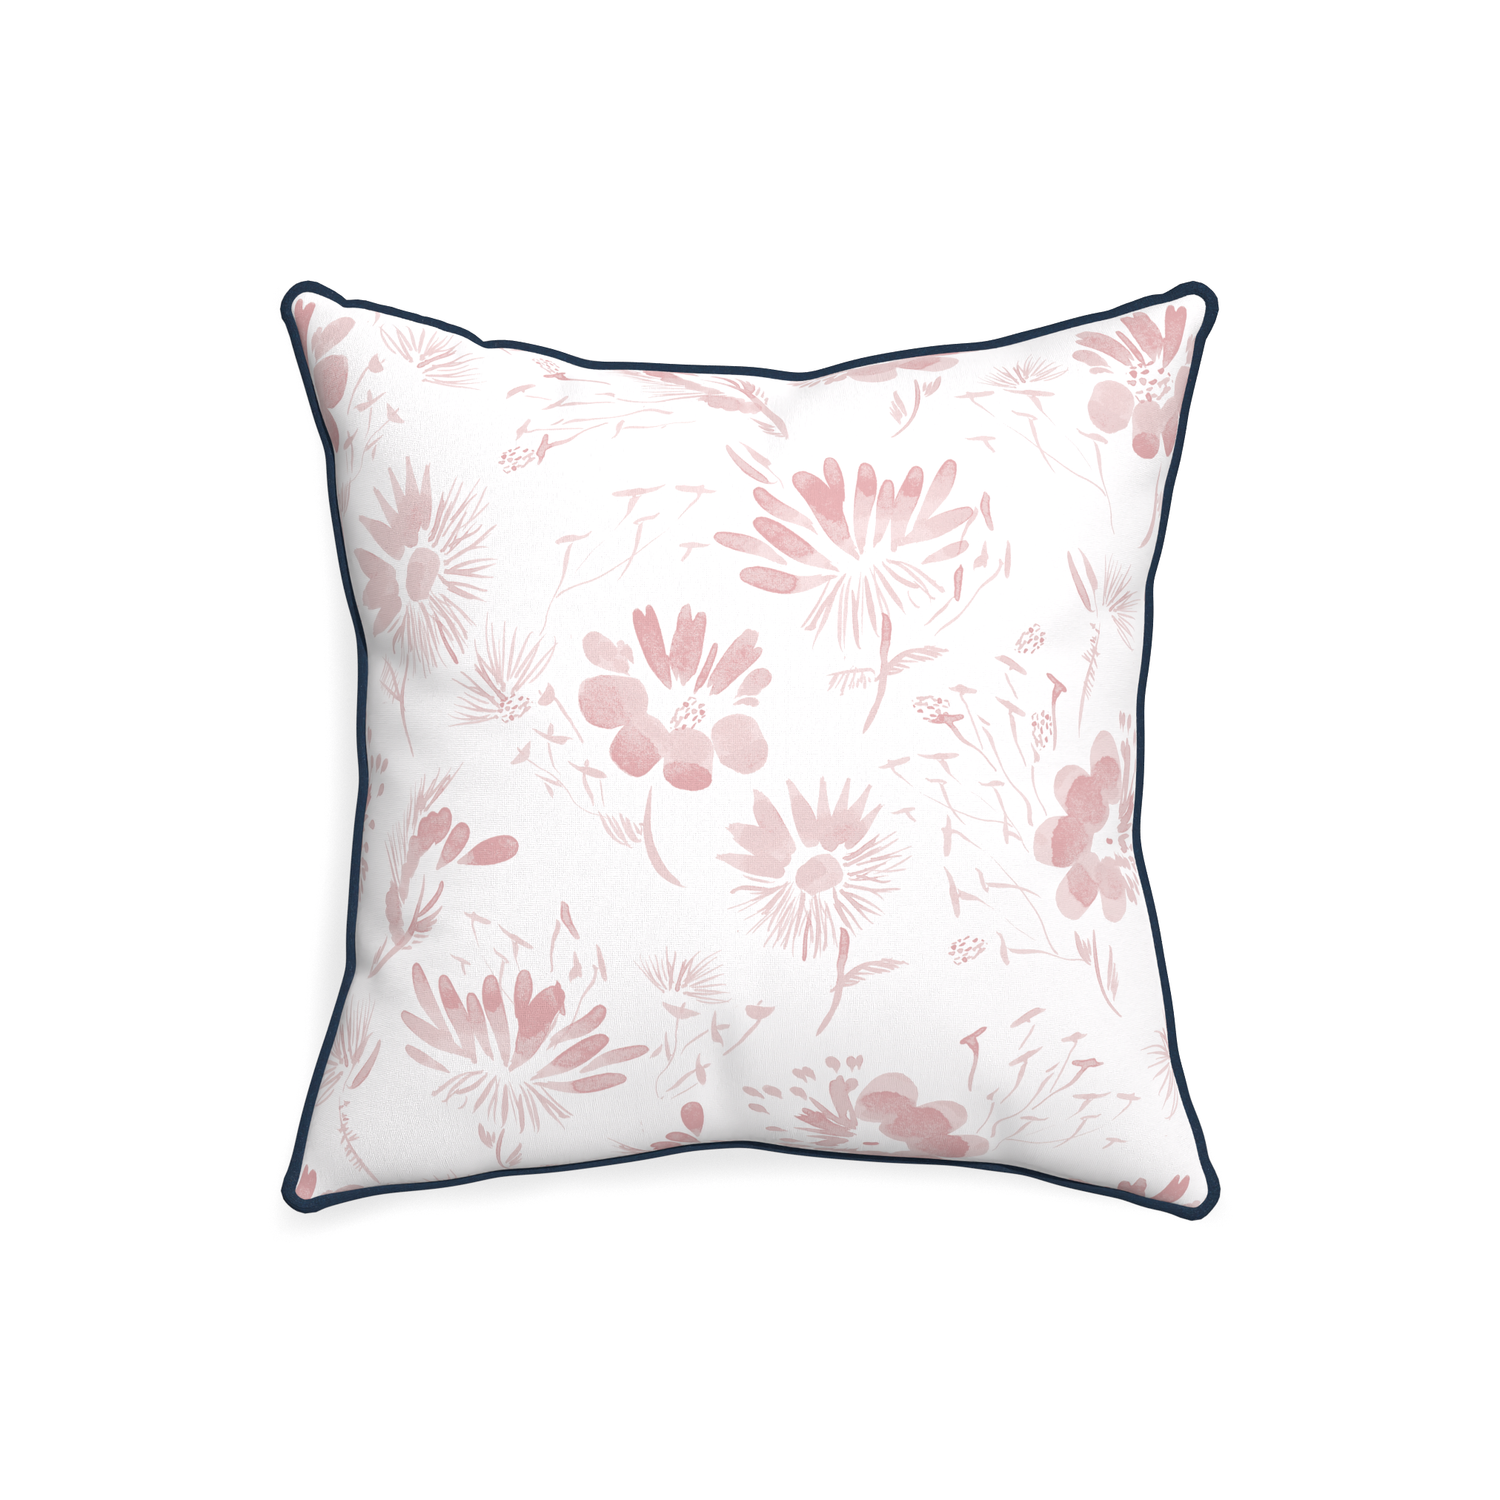 20-square blake custom pink floralpillow with c piping on white background